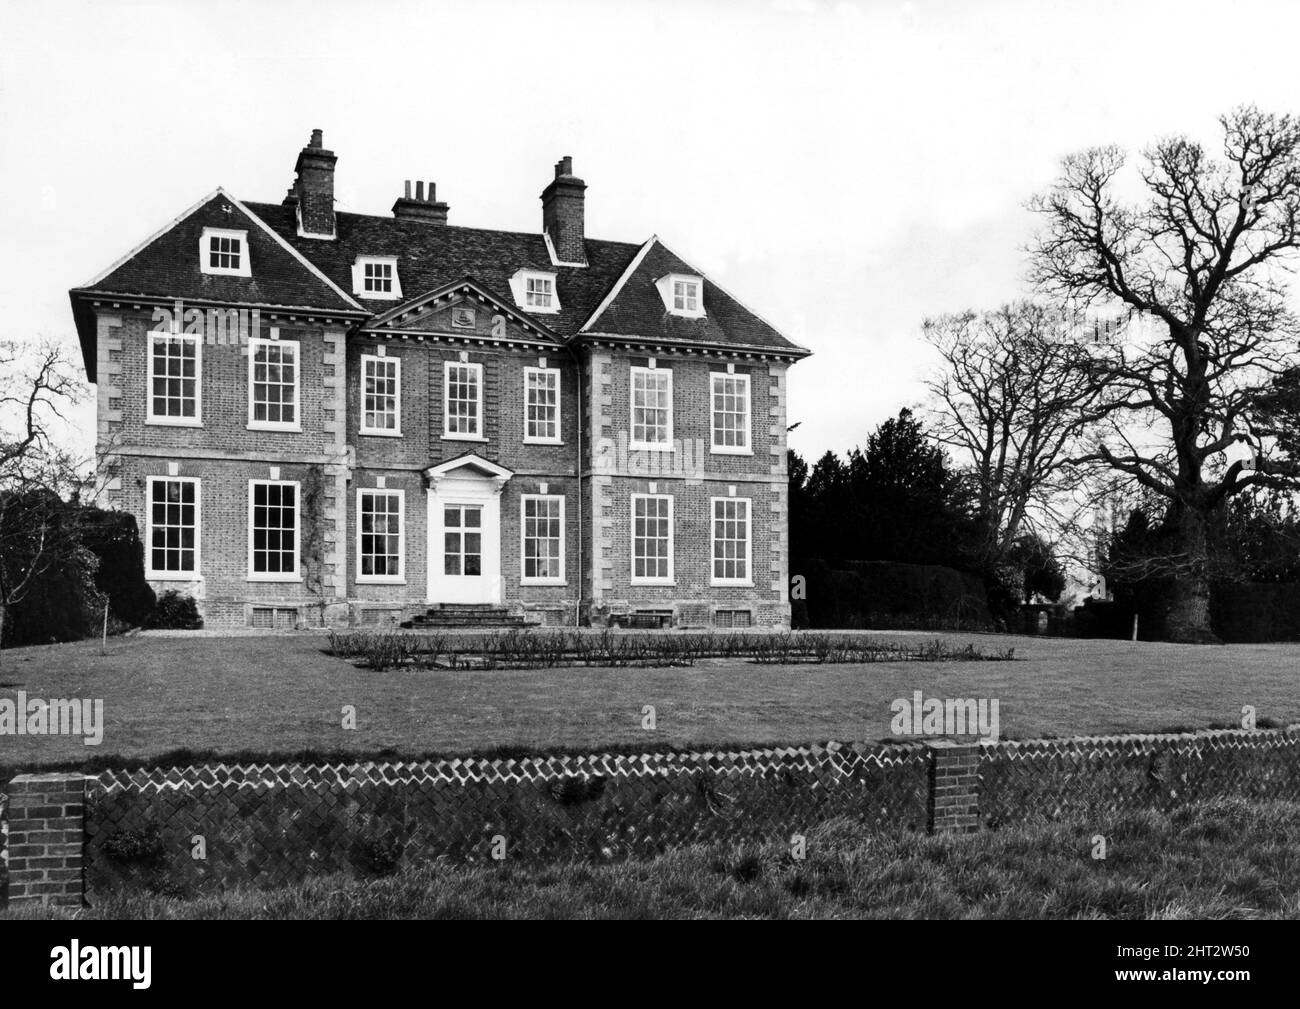 Alveston House in Alveston village near Stratford. It was sold in 1810 for ﾣ39,500 which ended a family  connection with peaceful Alveston which had lasted since 16th century days.  It has been described by a very great expert as 'a singularly perfect example of the Wren type of country house.'  Beautiful brickwork with dark blue headers and neat angle-dressings of stone, surrounds tall sash windows whose thin, elegant glazing bars replace sturdier ones or possibly mulions and transforms.  There are the expected dormers in the high-pitched roof which displays the typical white - painted modill Stock Photo